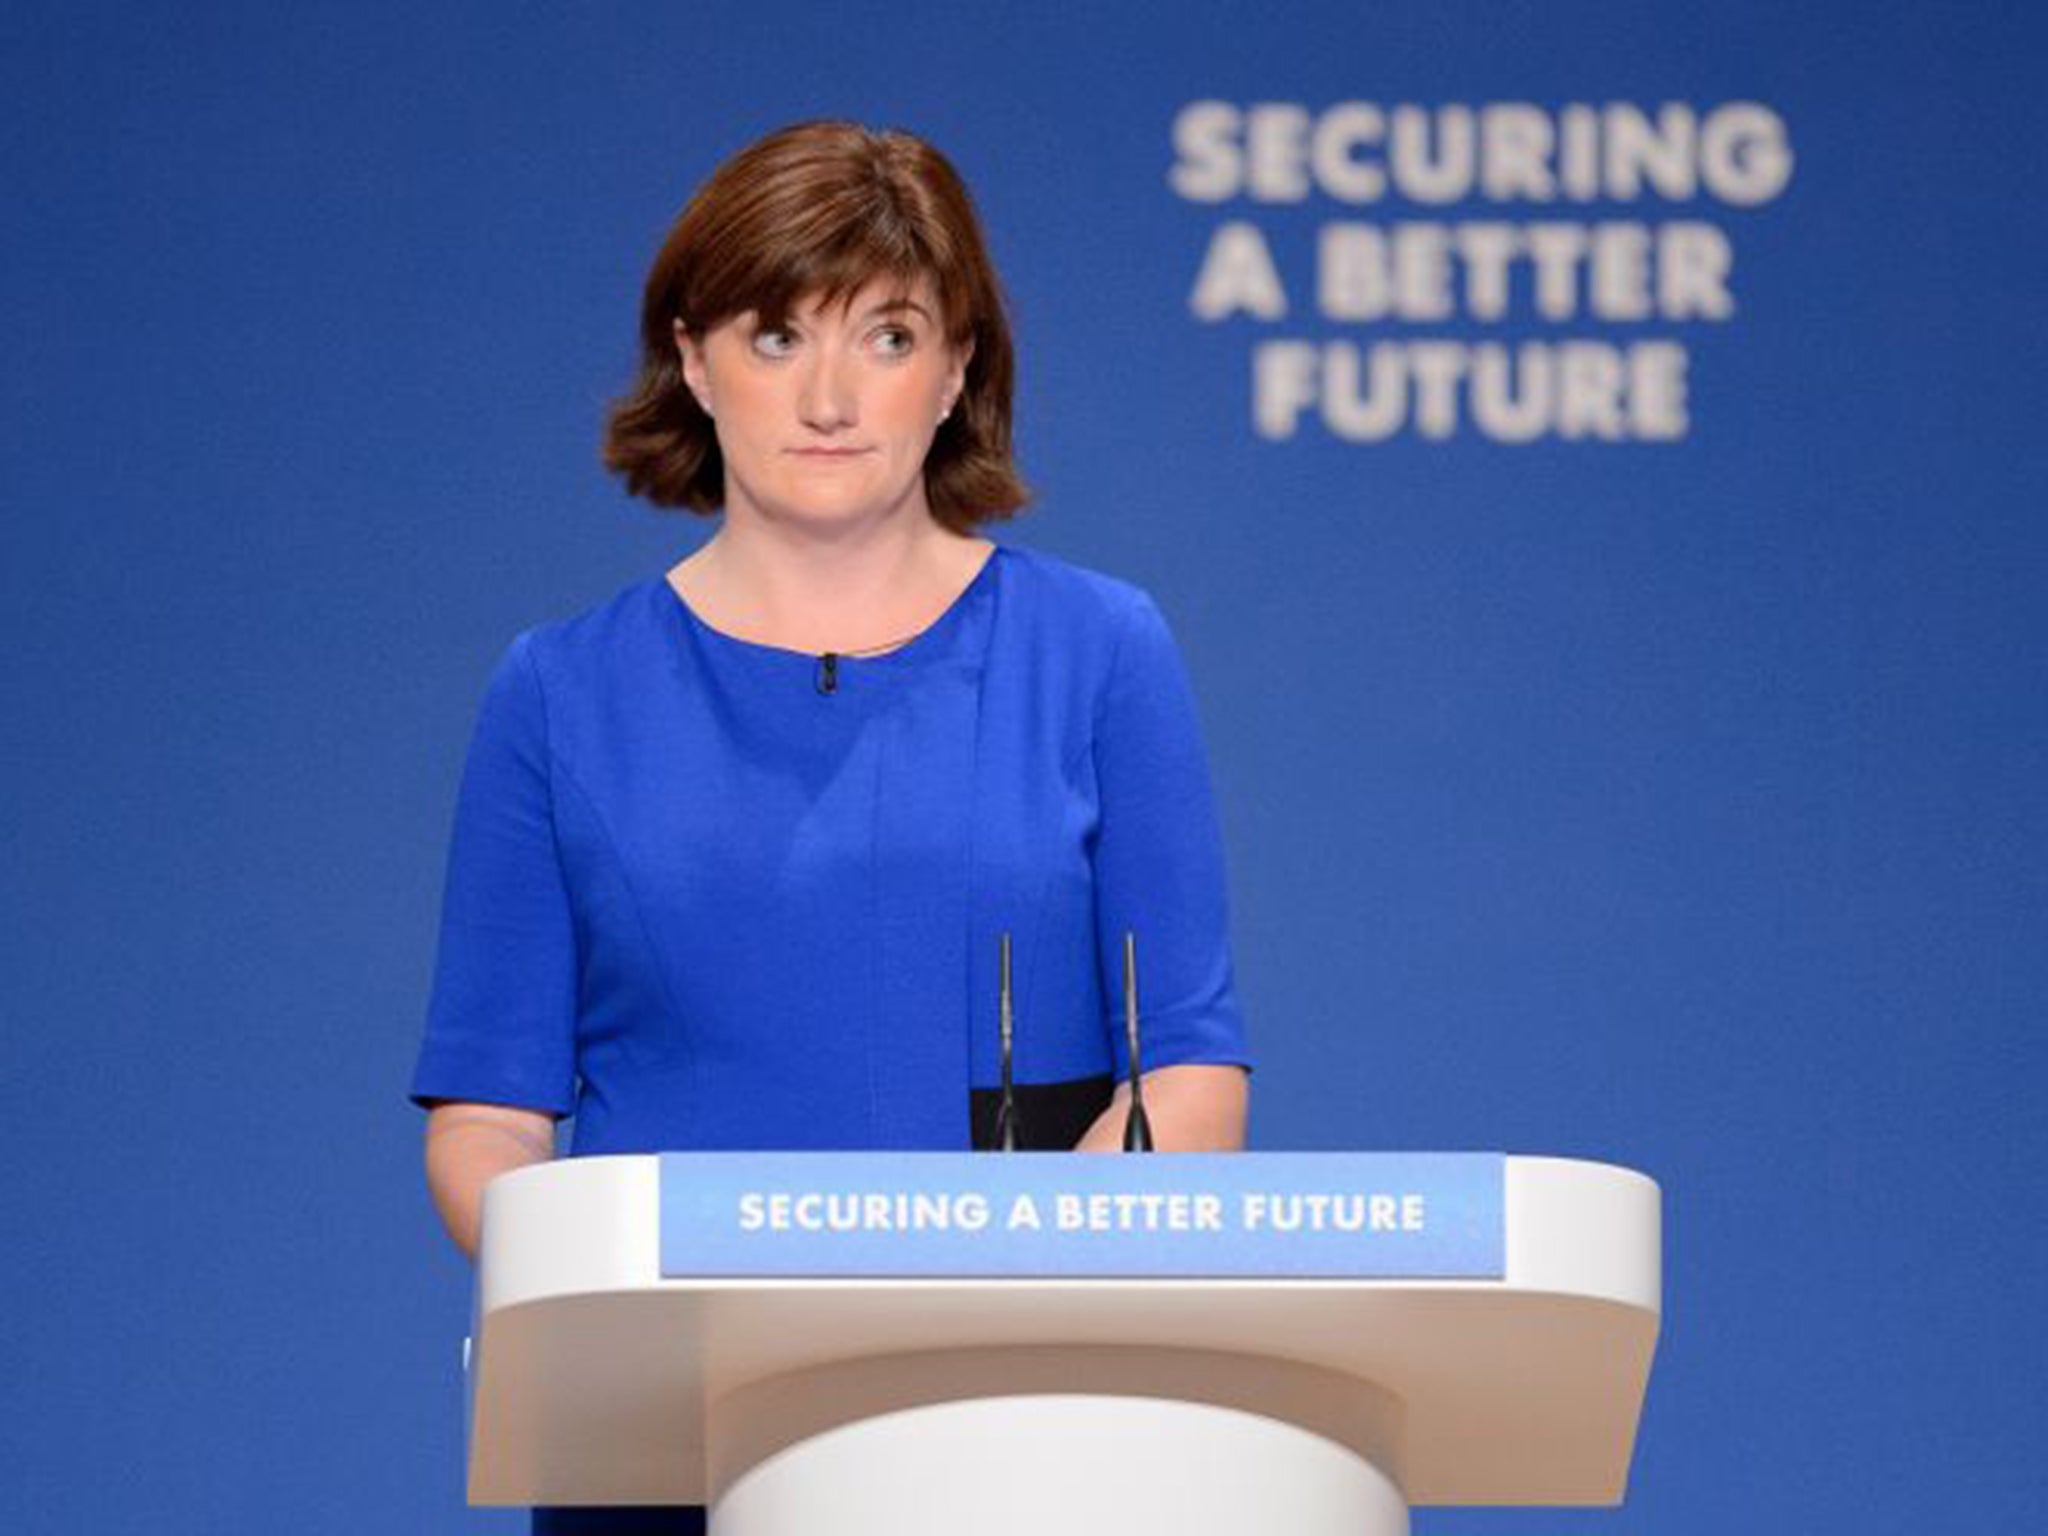 Nicky Morgan, the Education Secretary and Minister for Women and Equalities